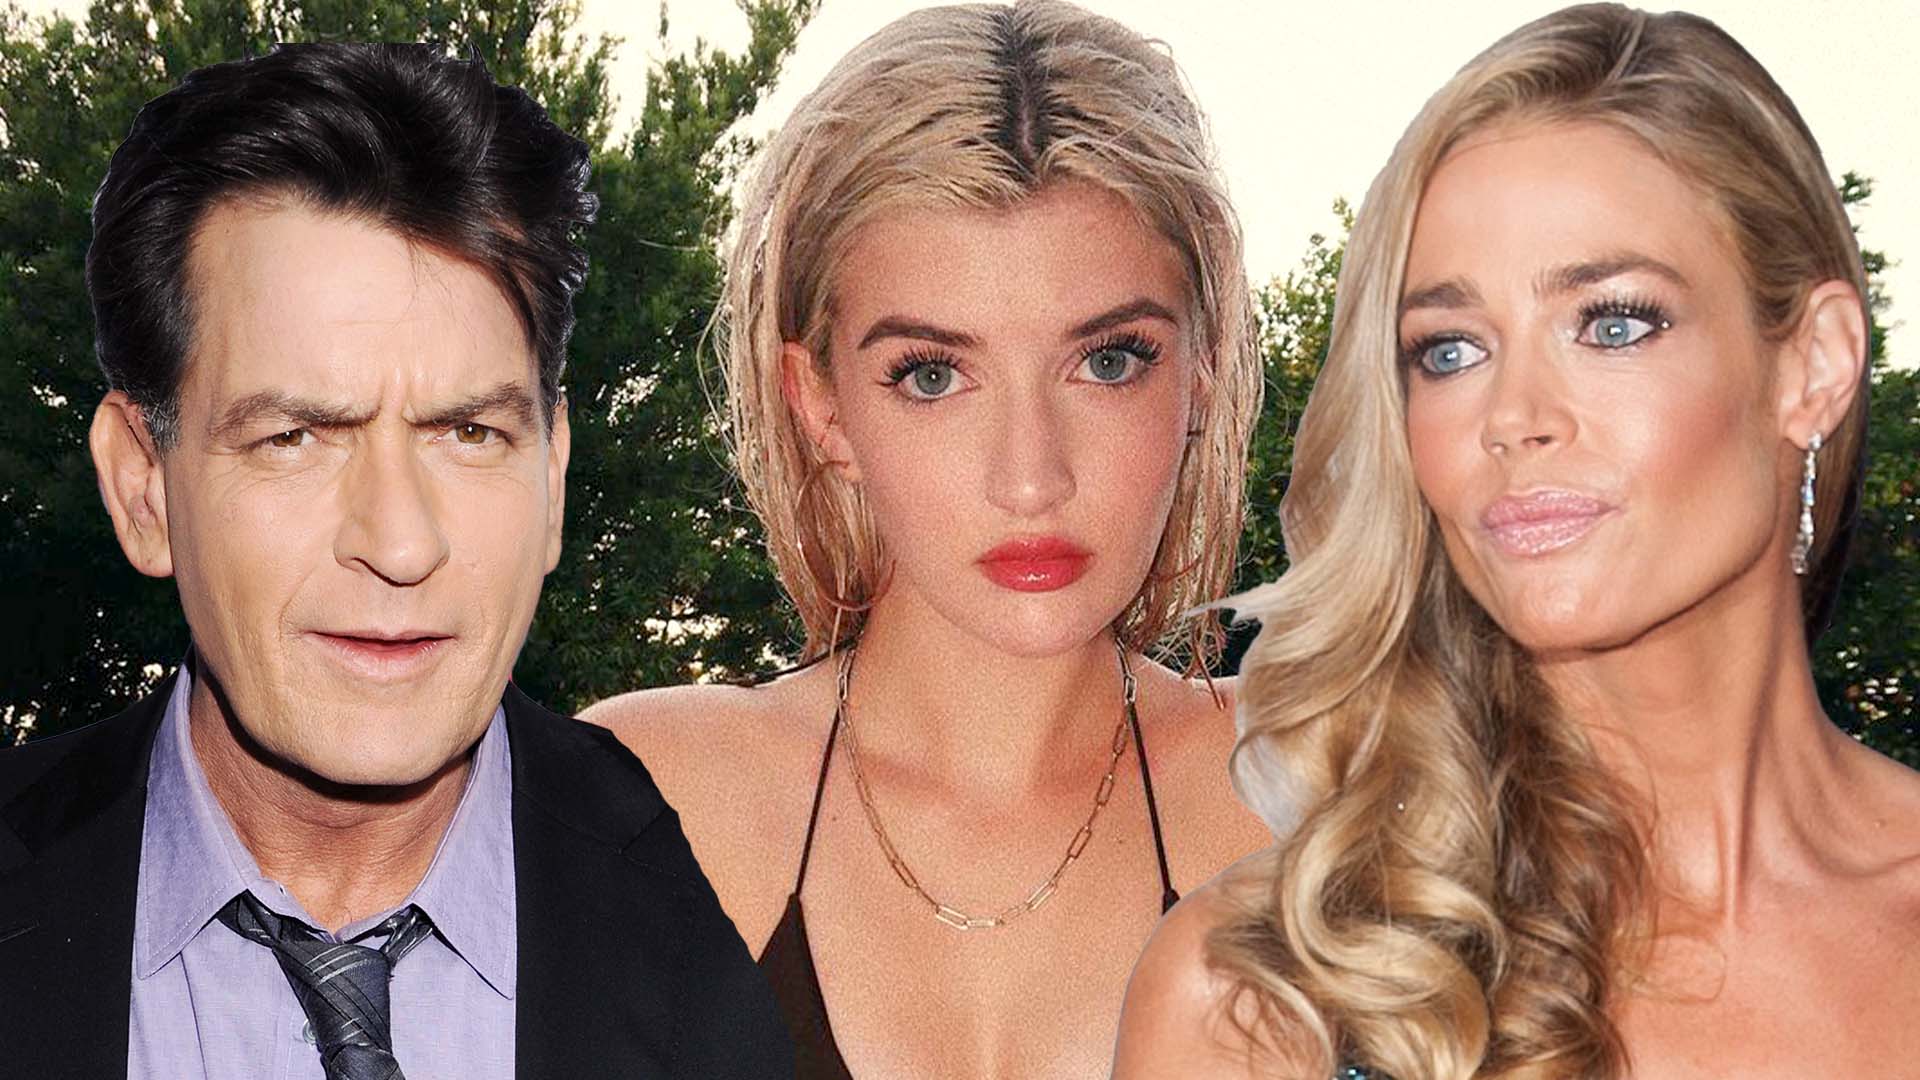 Denise Richards Blowjob - Charlie Sheen and Denise Richards' Daughter Sami Shares Her Career Goals  After Joining OnlyFans | Entertainment Tonight